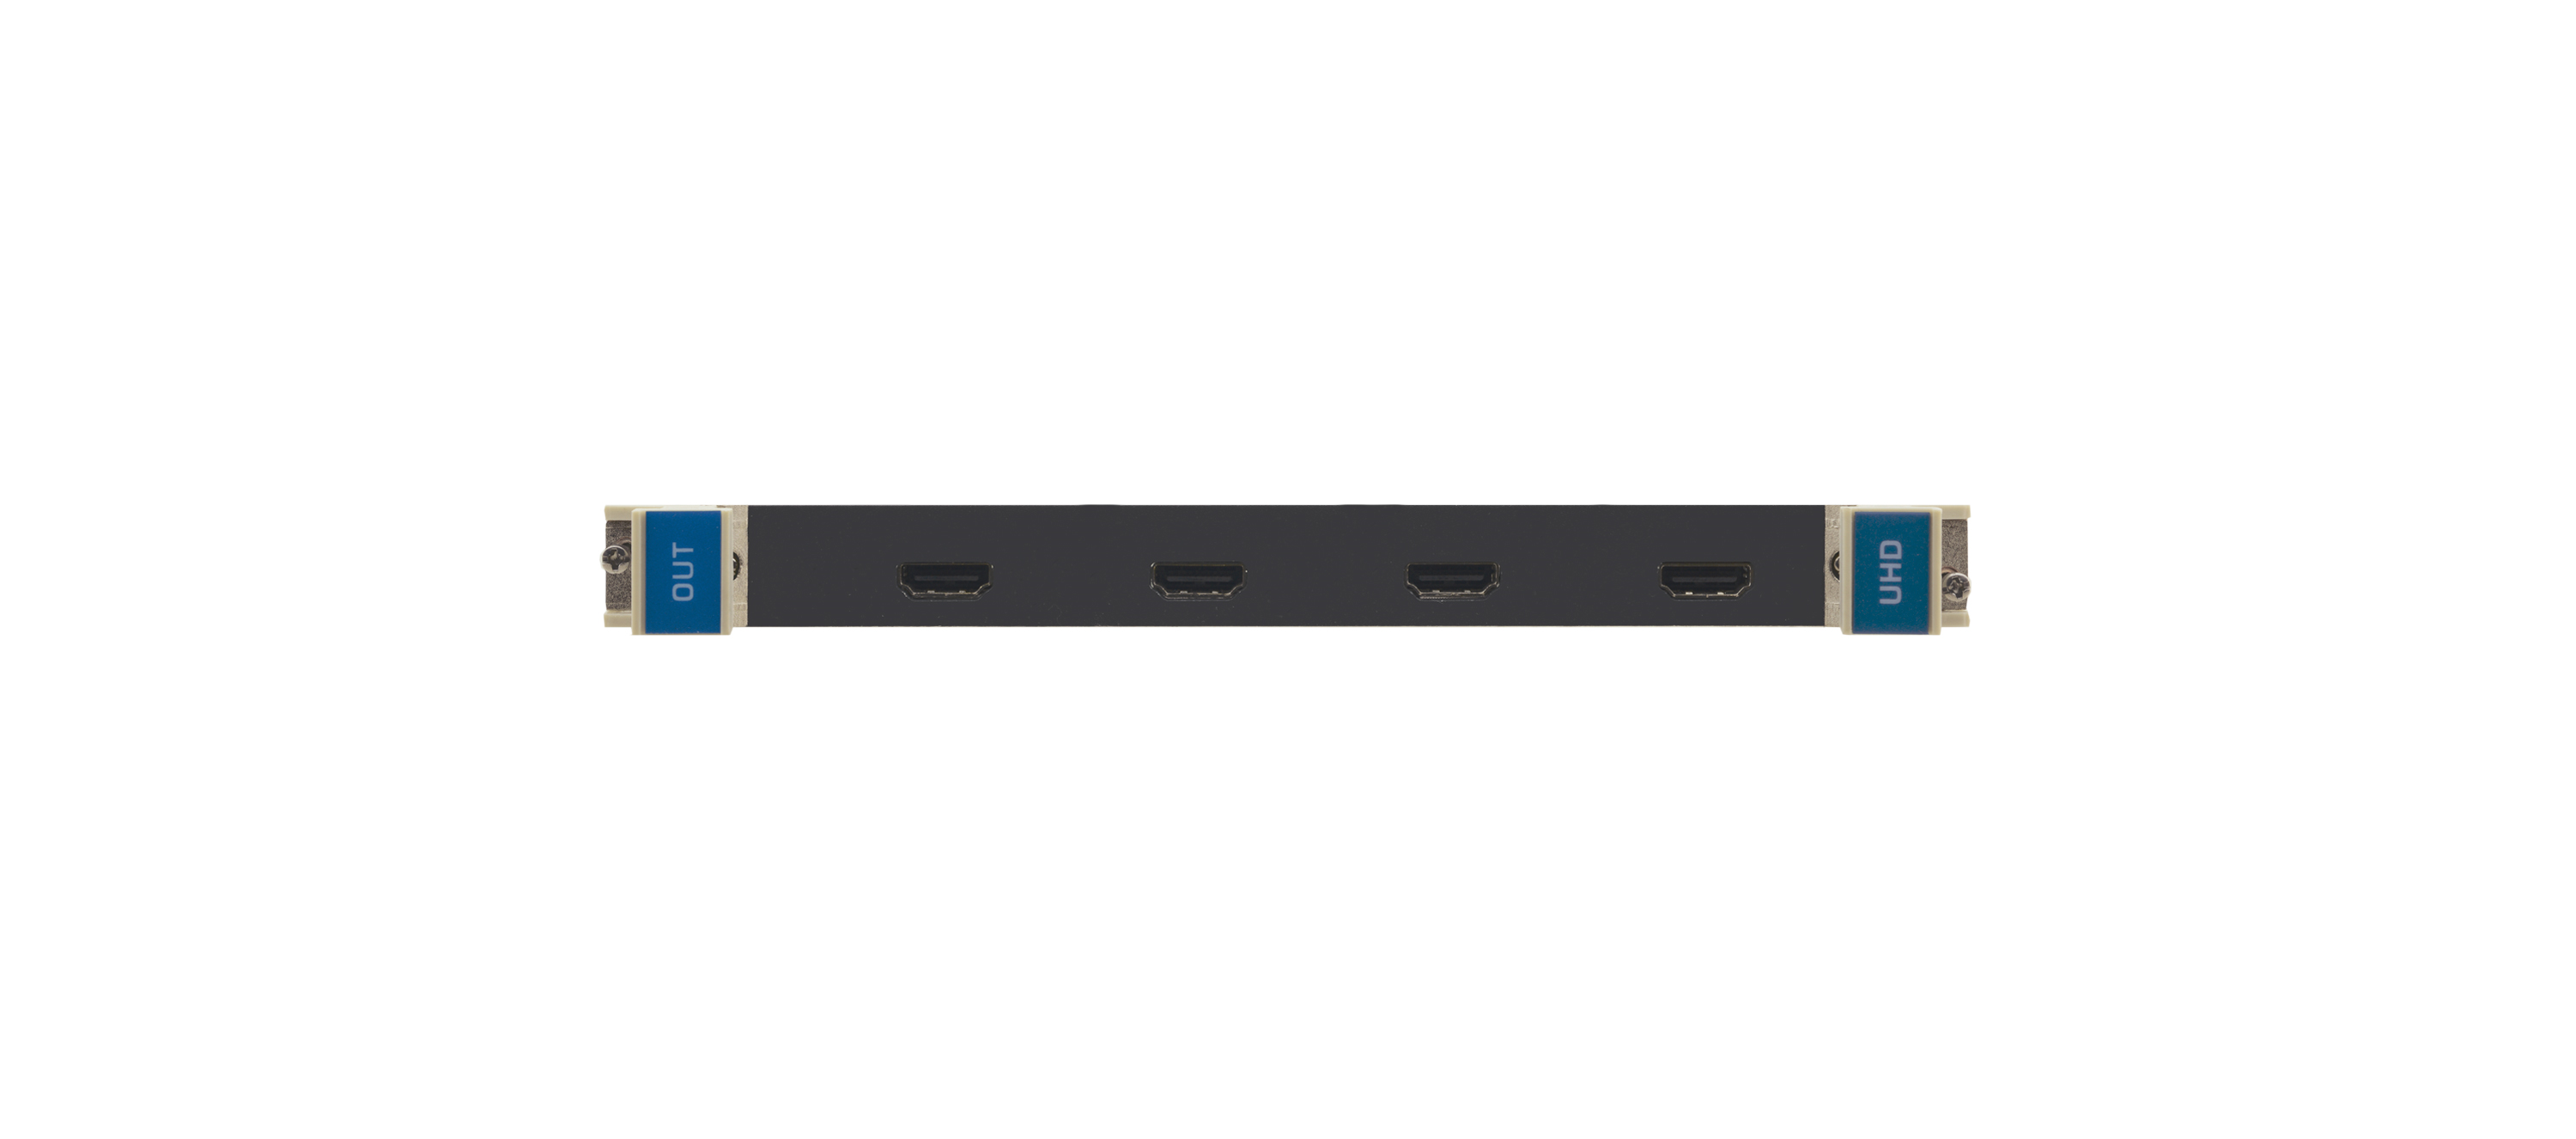 UHD-OUT4-F32/STANDALONE 4–Channel 4K60 4:2:0 HDMI Output Card